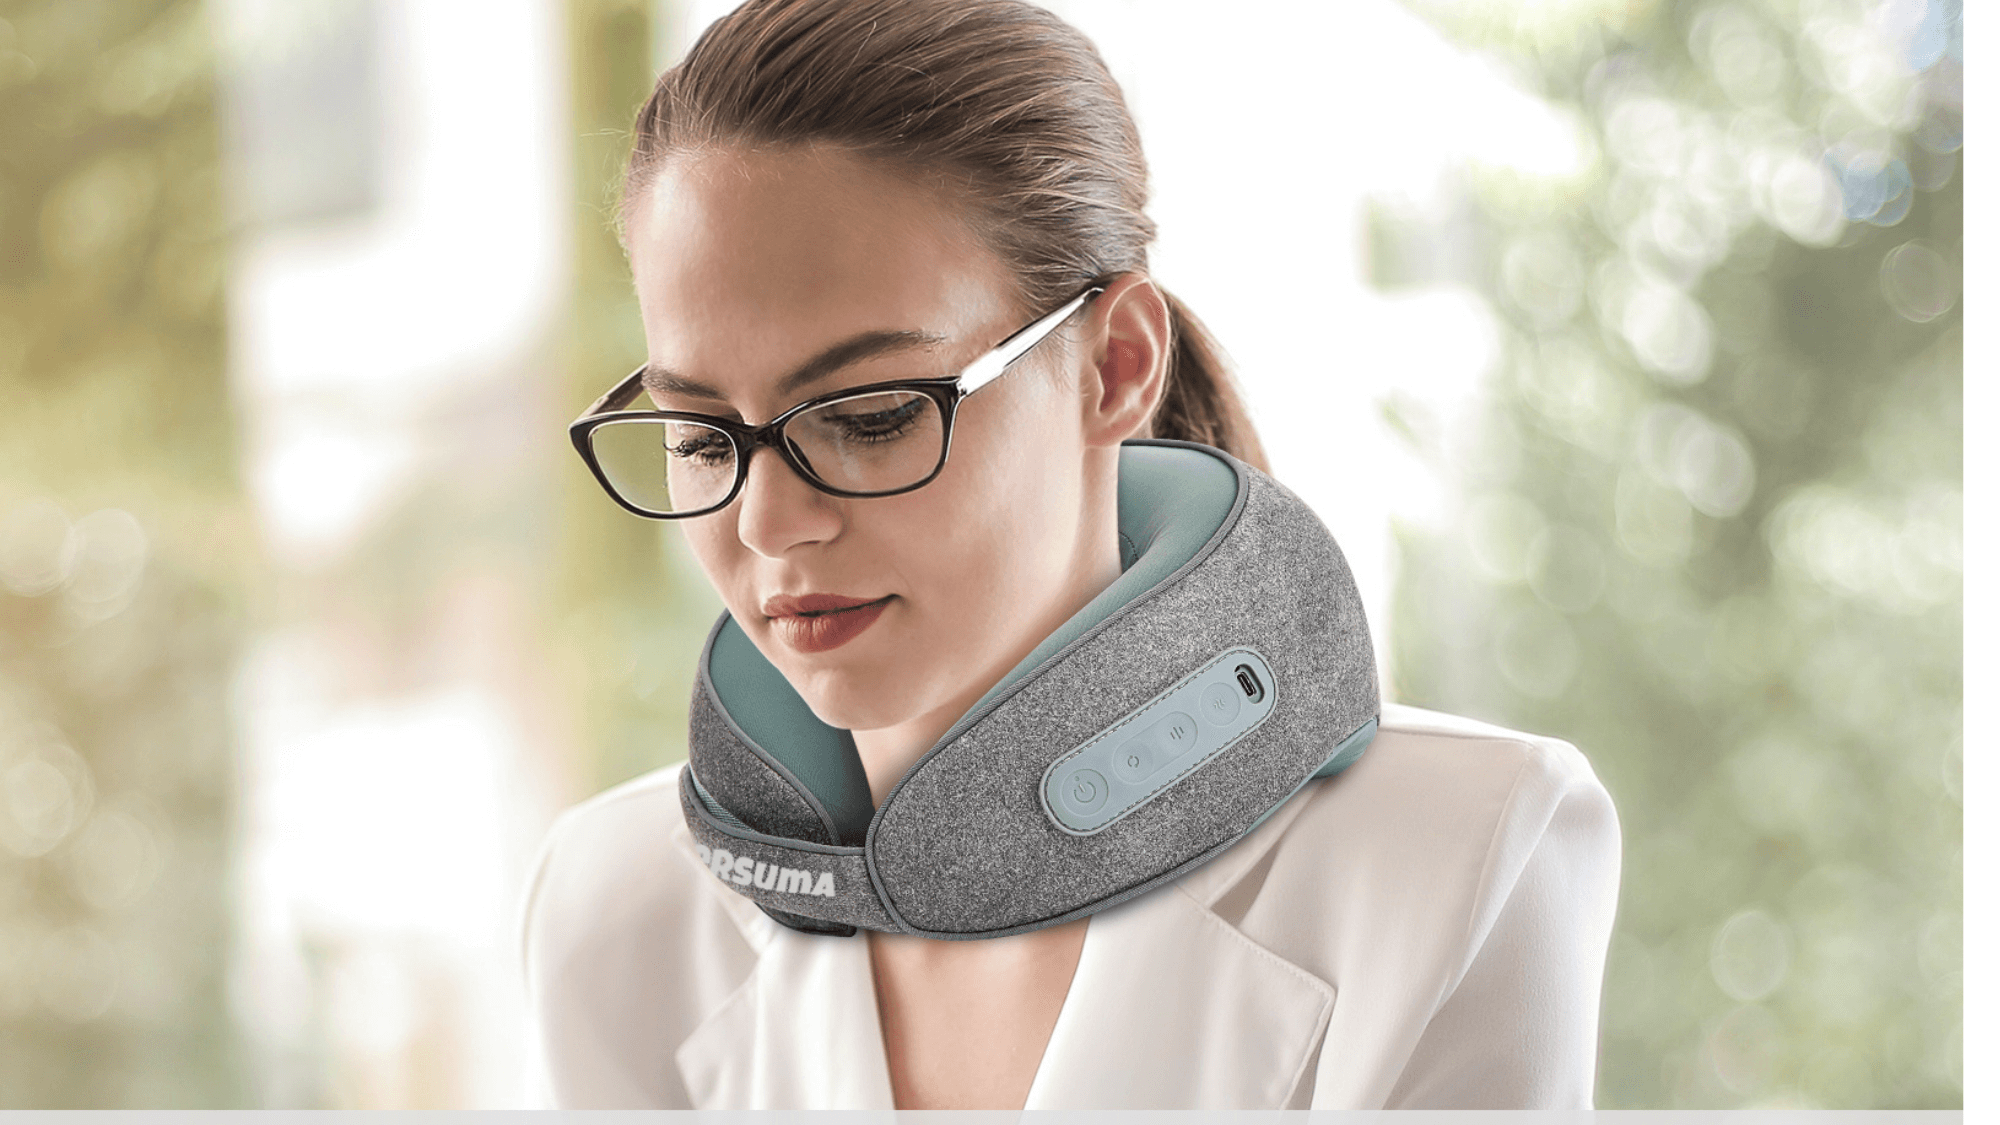 DERSUMA Neck Massager Shiatsu - Neck Massage: 3D Deep Kneading - Wireless Massage Pad with Heat Function Relief Neck Muscle Pain, for Home Office and Car